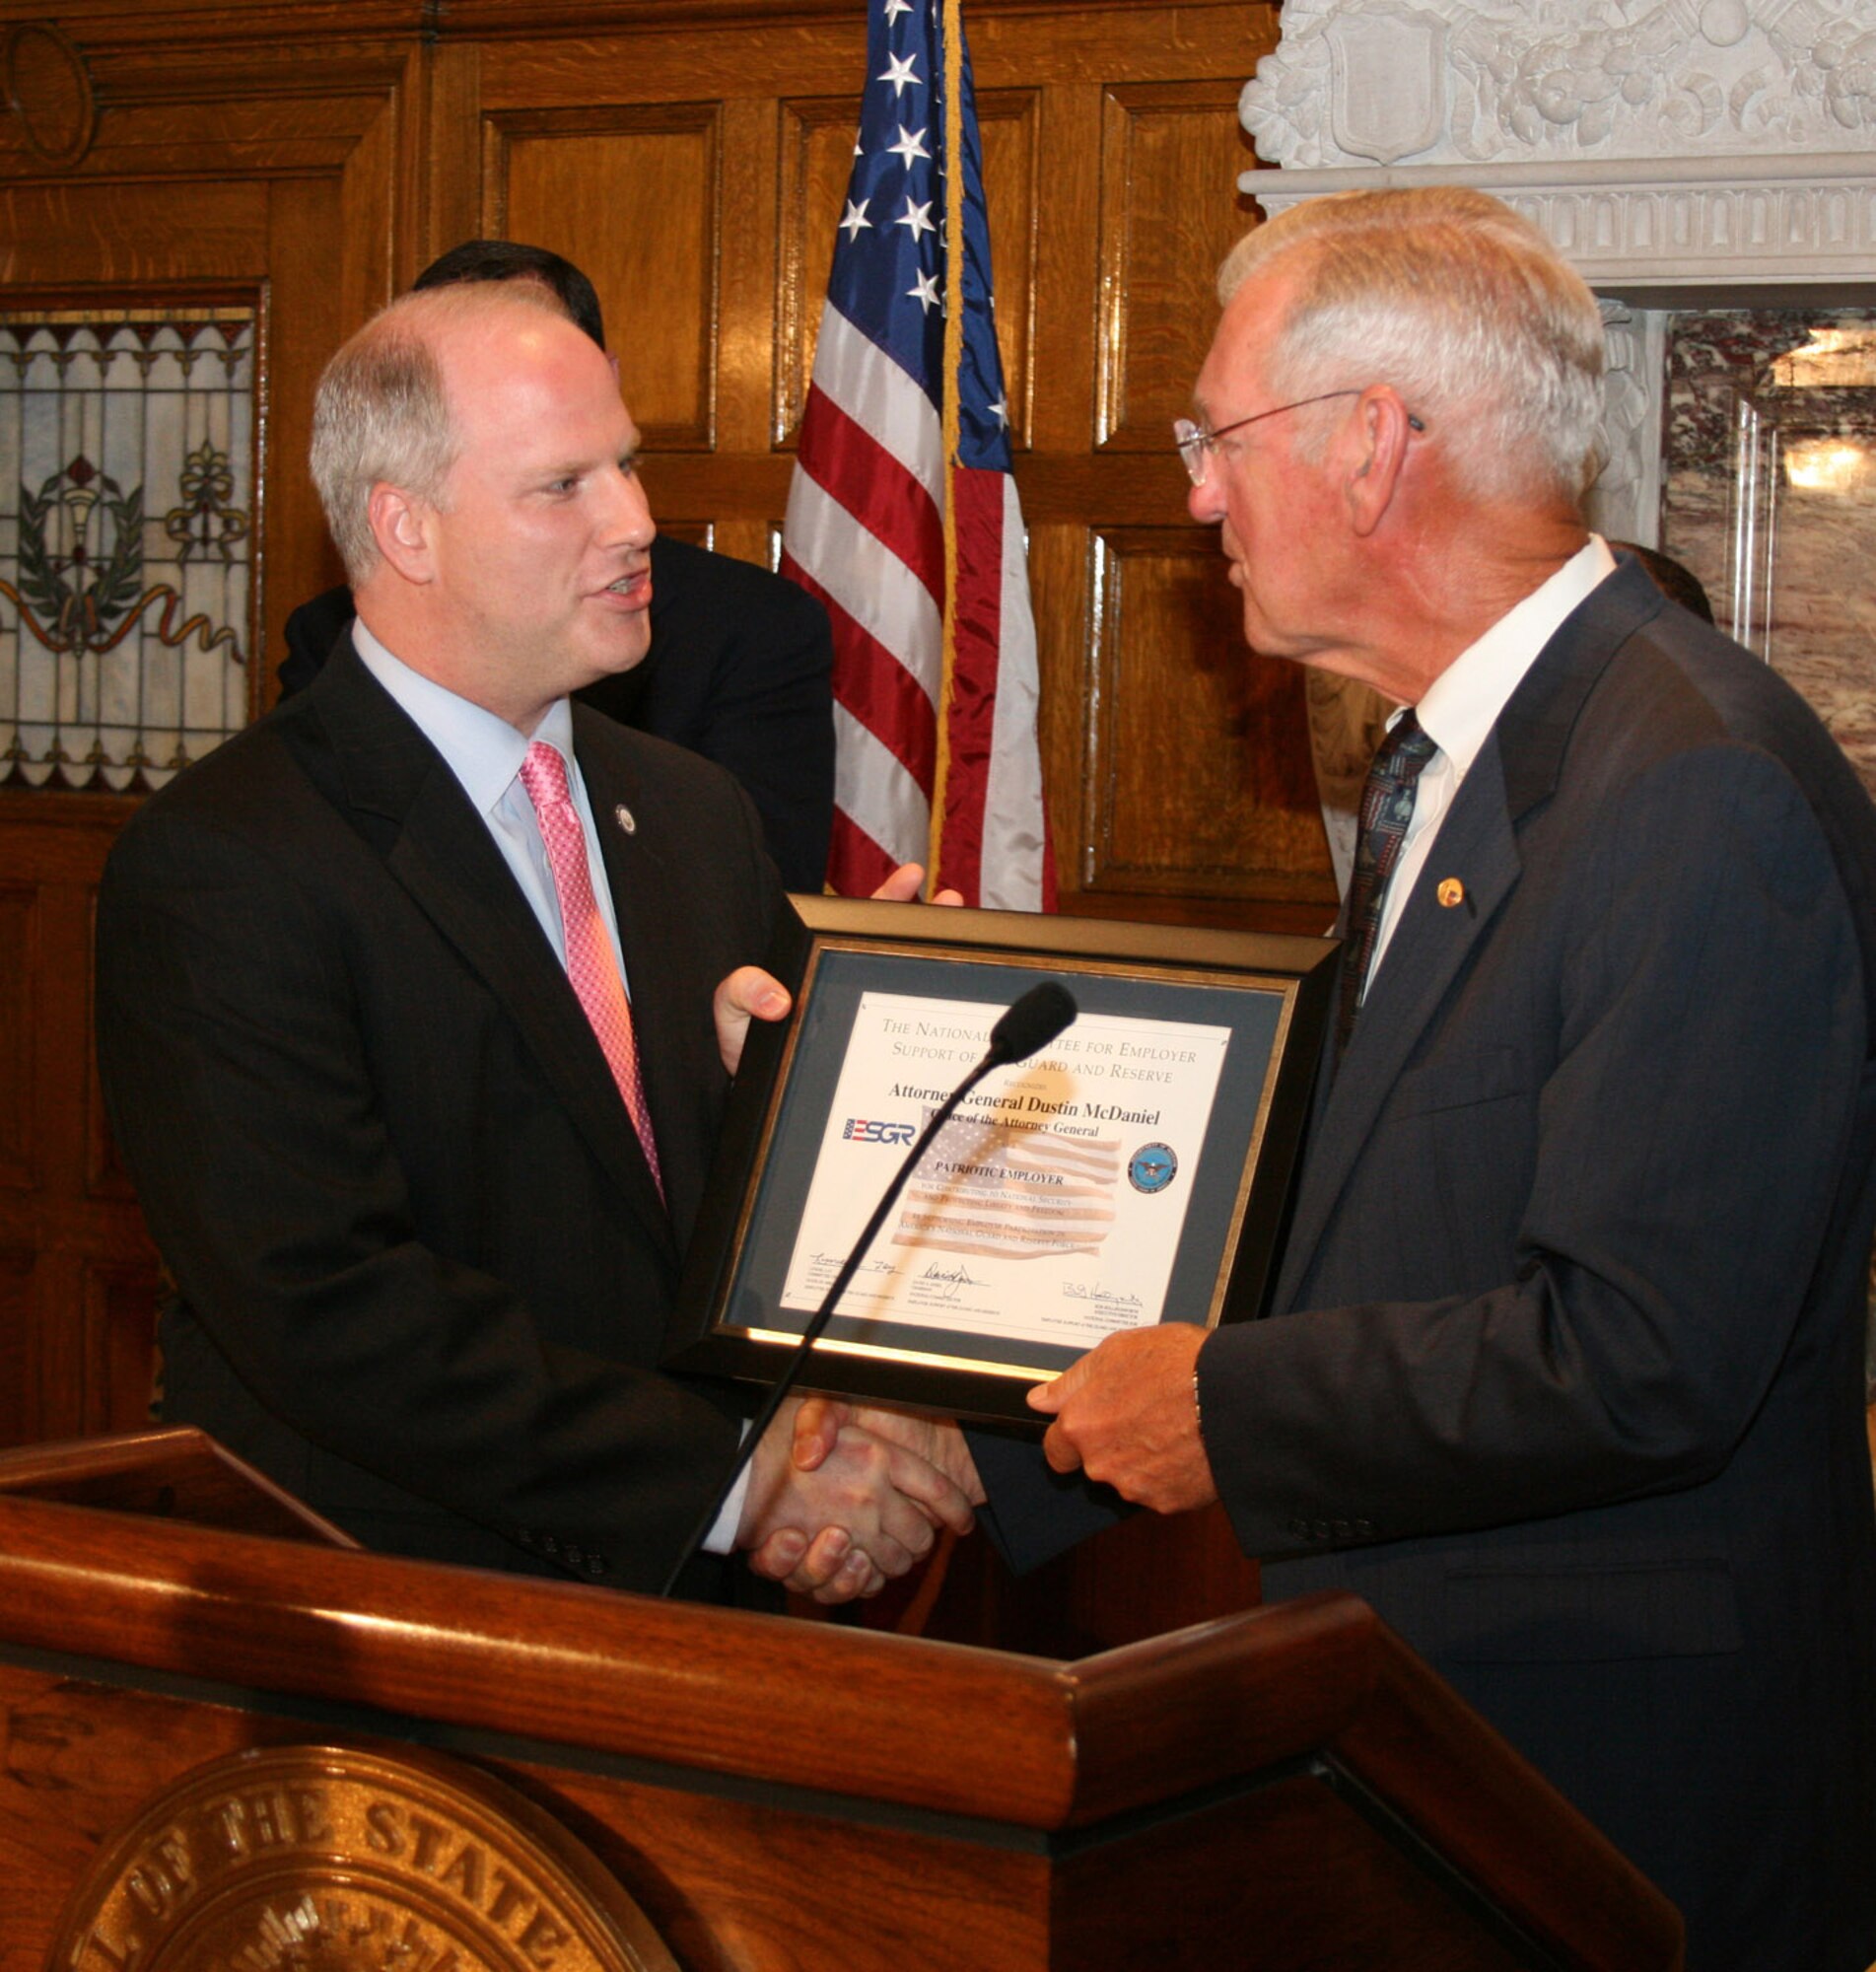 Arkansas Attorney General Dustin McDaniel accepts an Employer Support of the Guard and Reserve award from State ESGR Chairman and retired Maj. Gen. Don C. Morrow. (U.S. Air Force photo by Master Sgt. Bob Oldham)